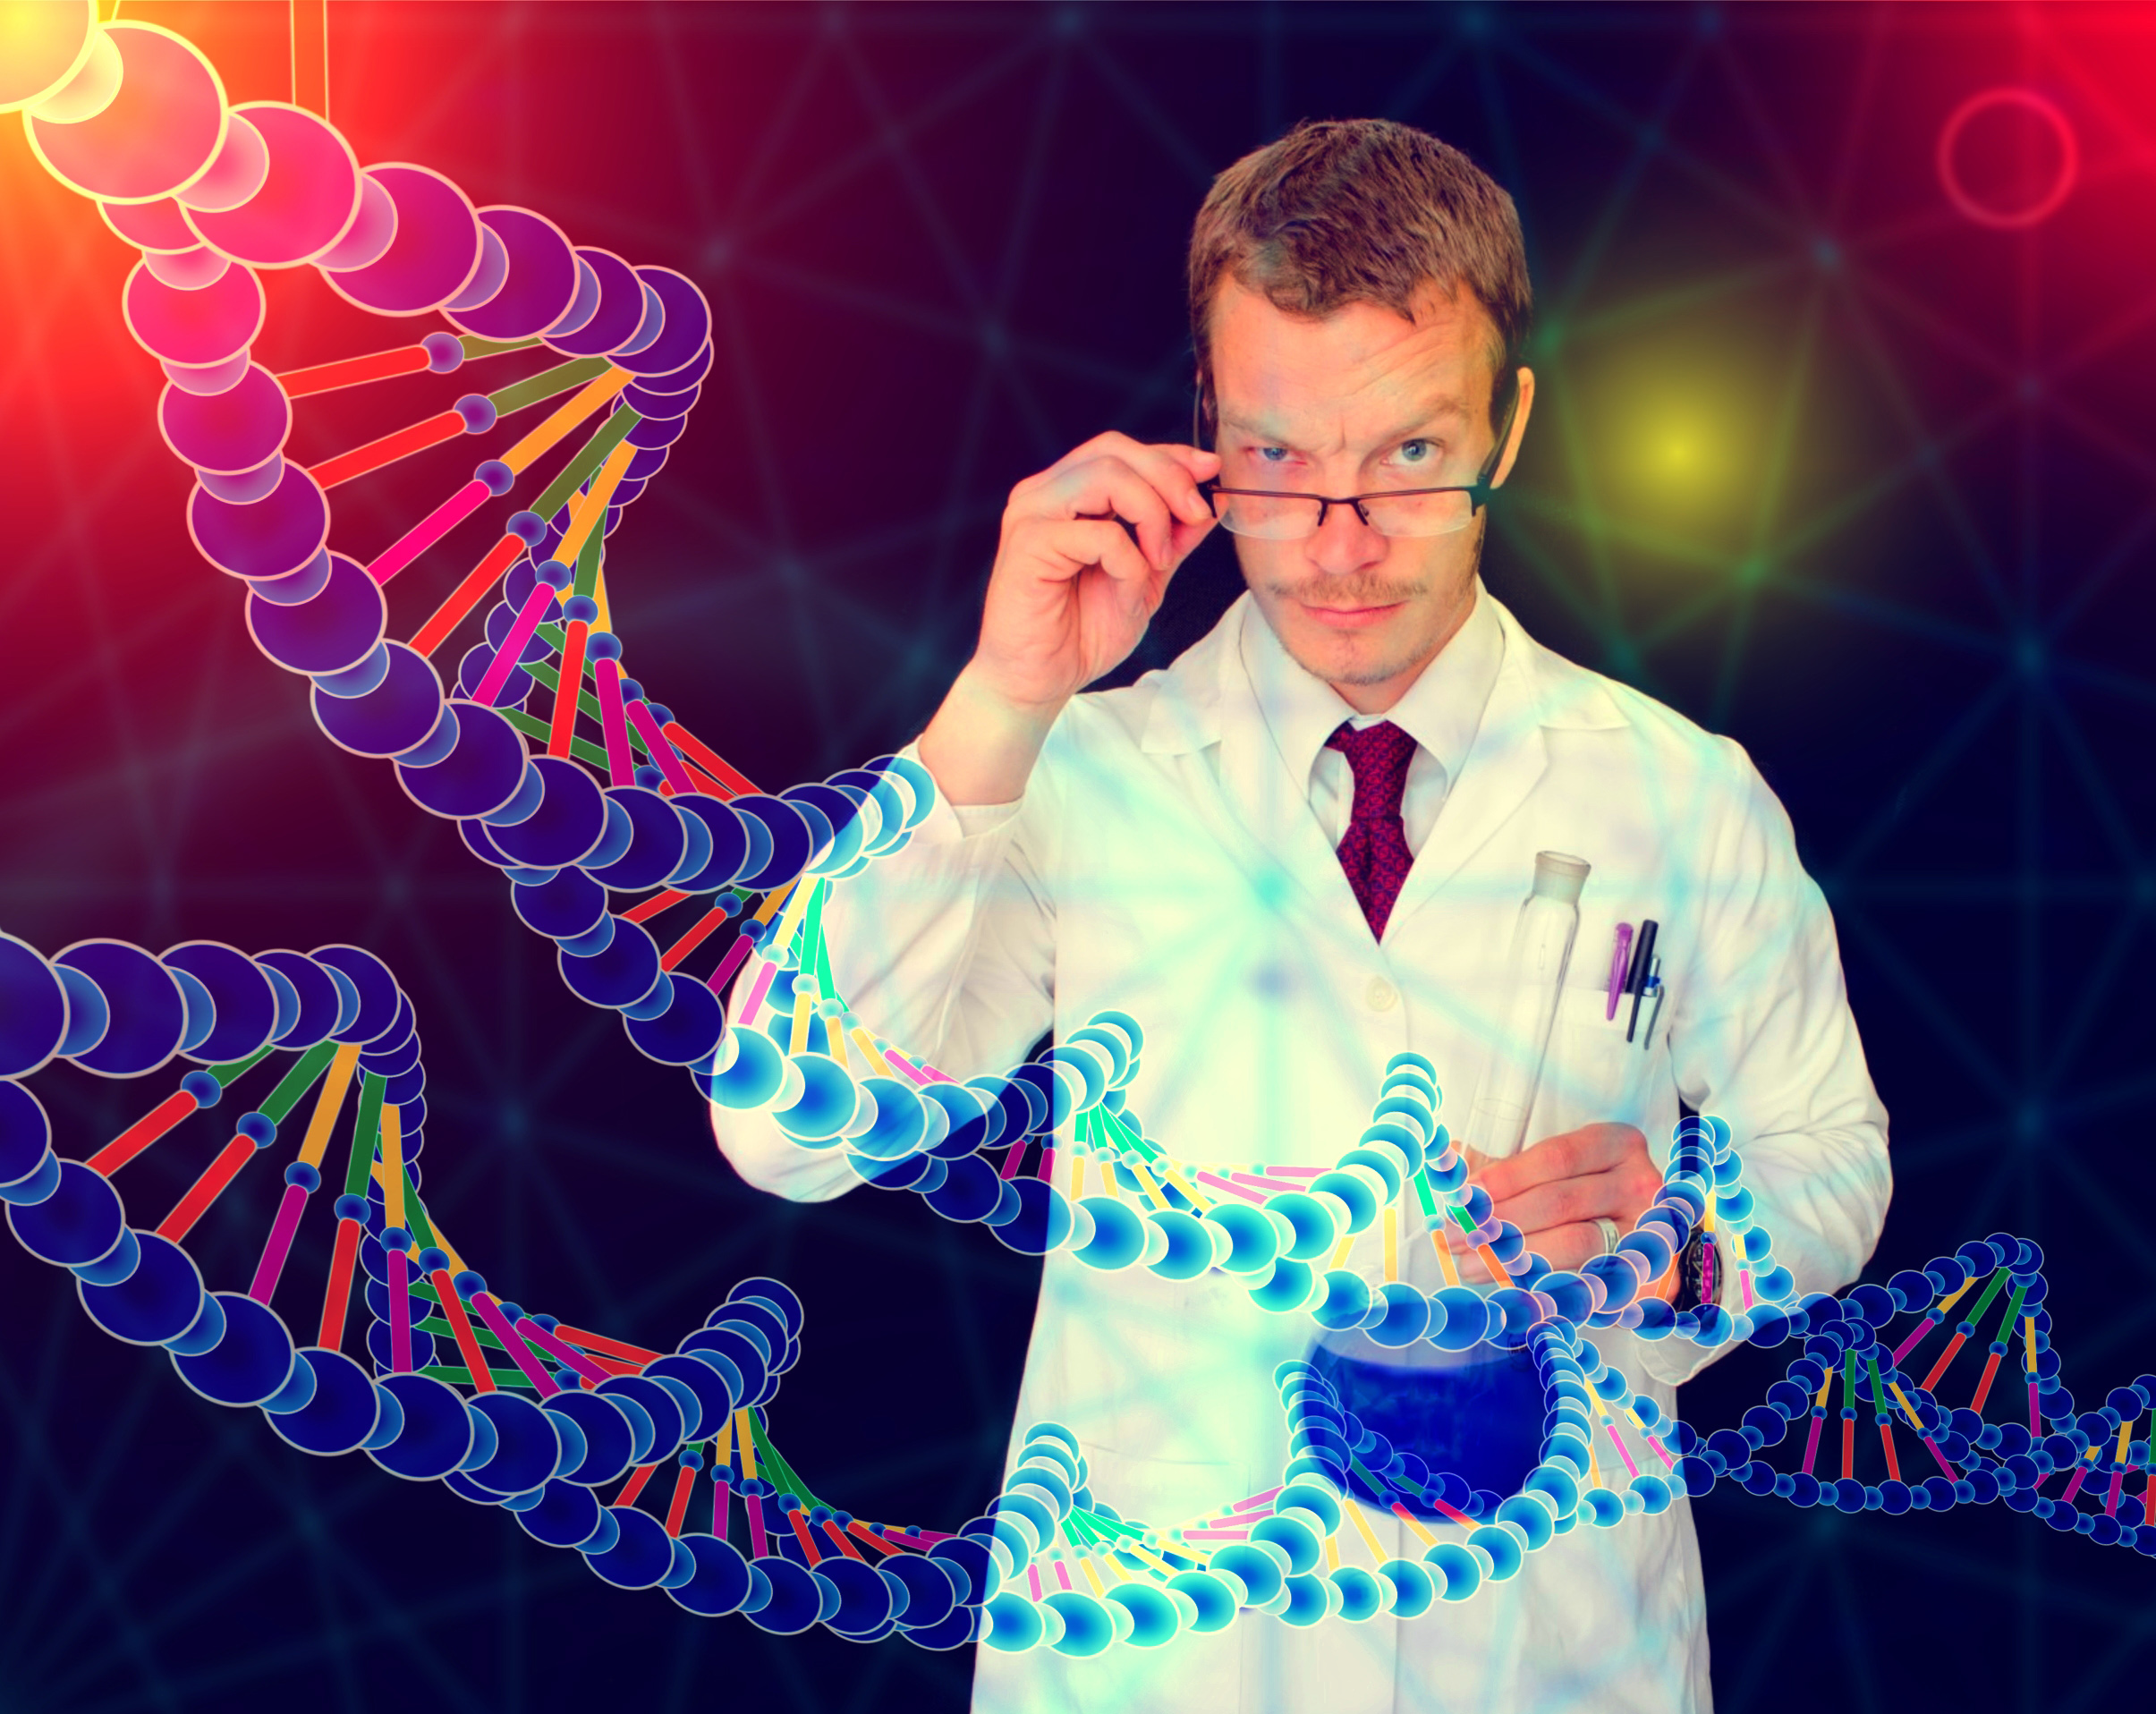 Medical doctor performing dna analysis and sequencing - illustration photo